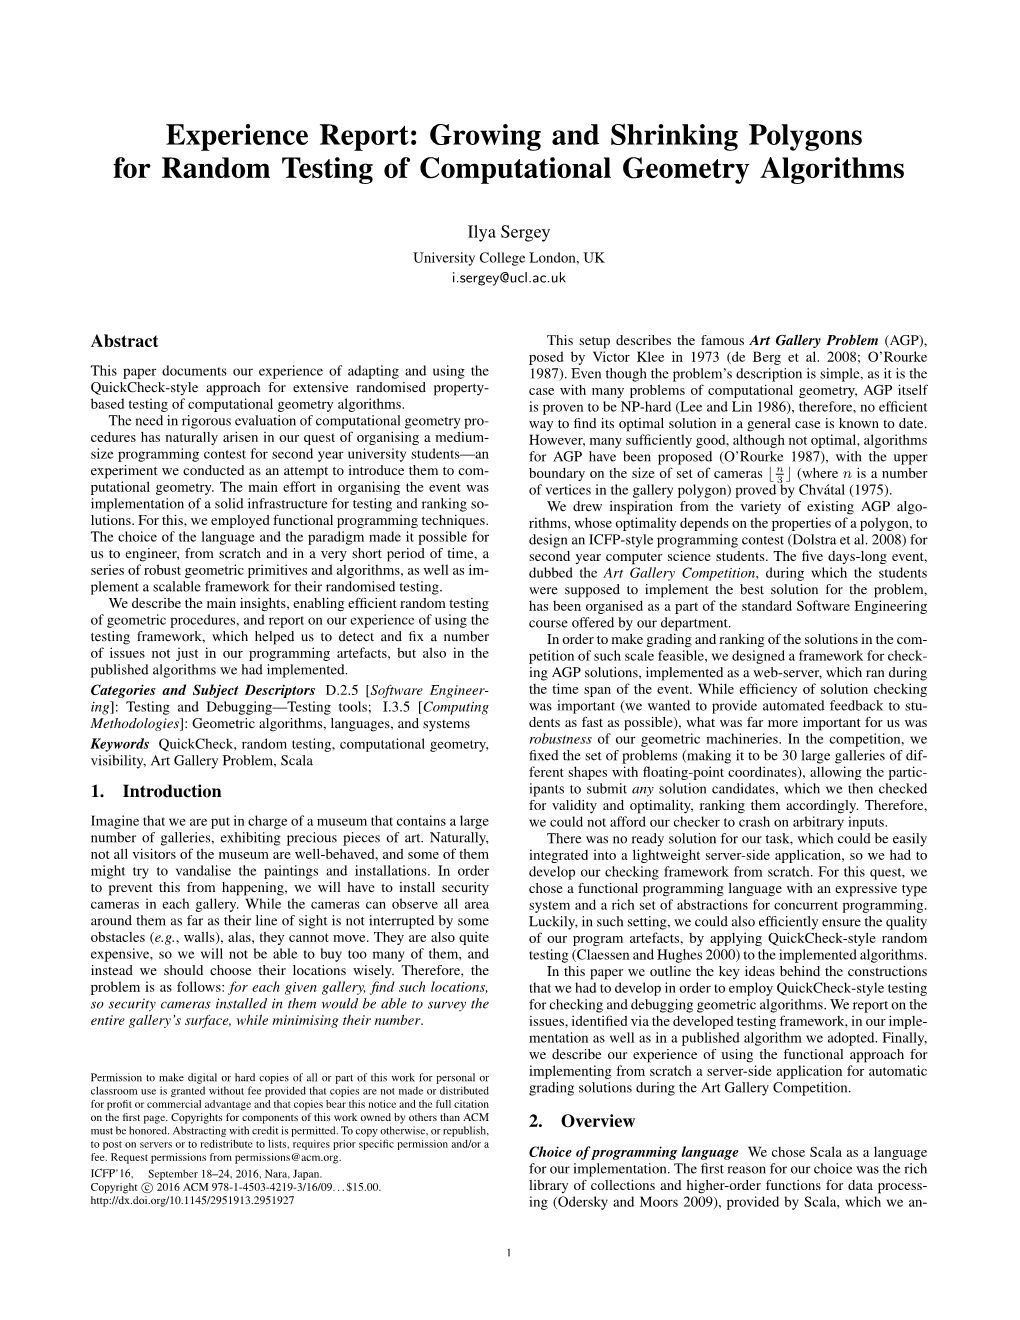 Experience Report: Growing and Shrinking Polygons for Random Testing of Computational Geometry Algorithms